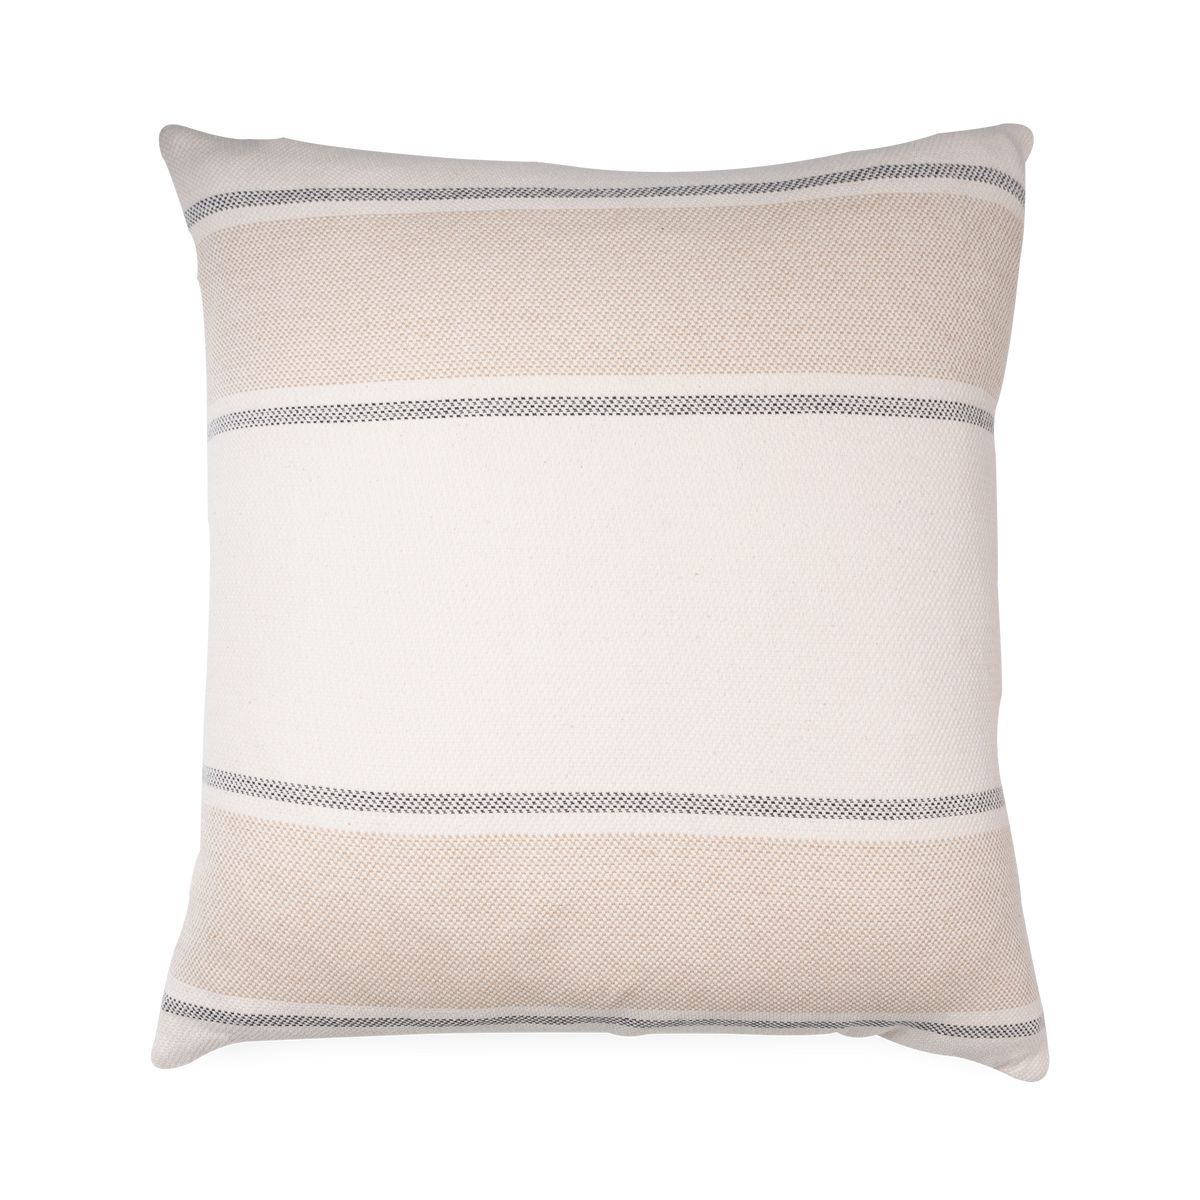 Providing a welcoming textural appeal to your seating or bedding collection, the Salinas Cotton Pillow uses a garment washed cotton to provide an exceptionally soft texture.